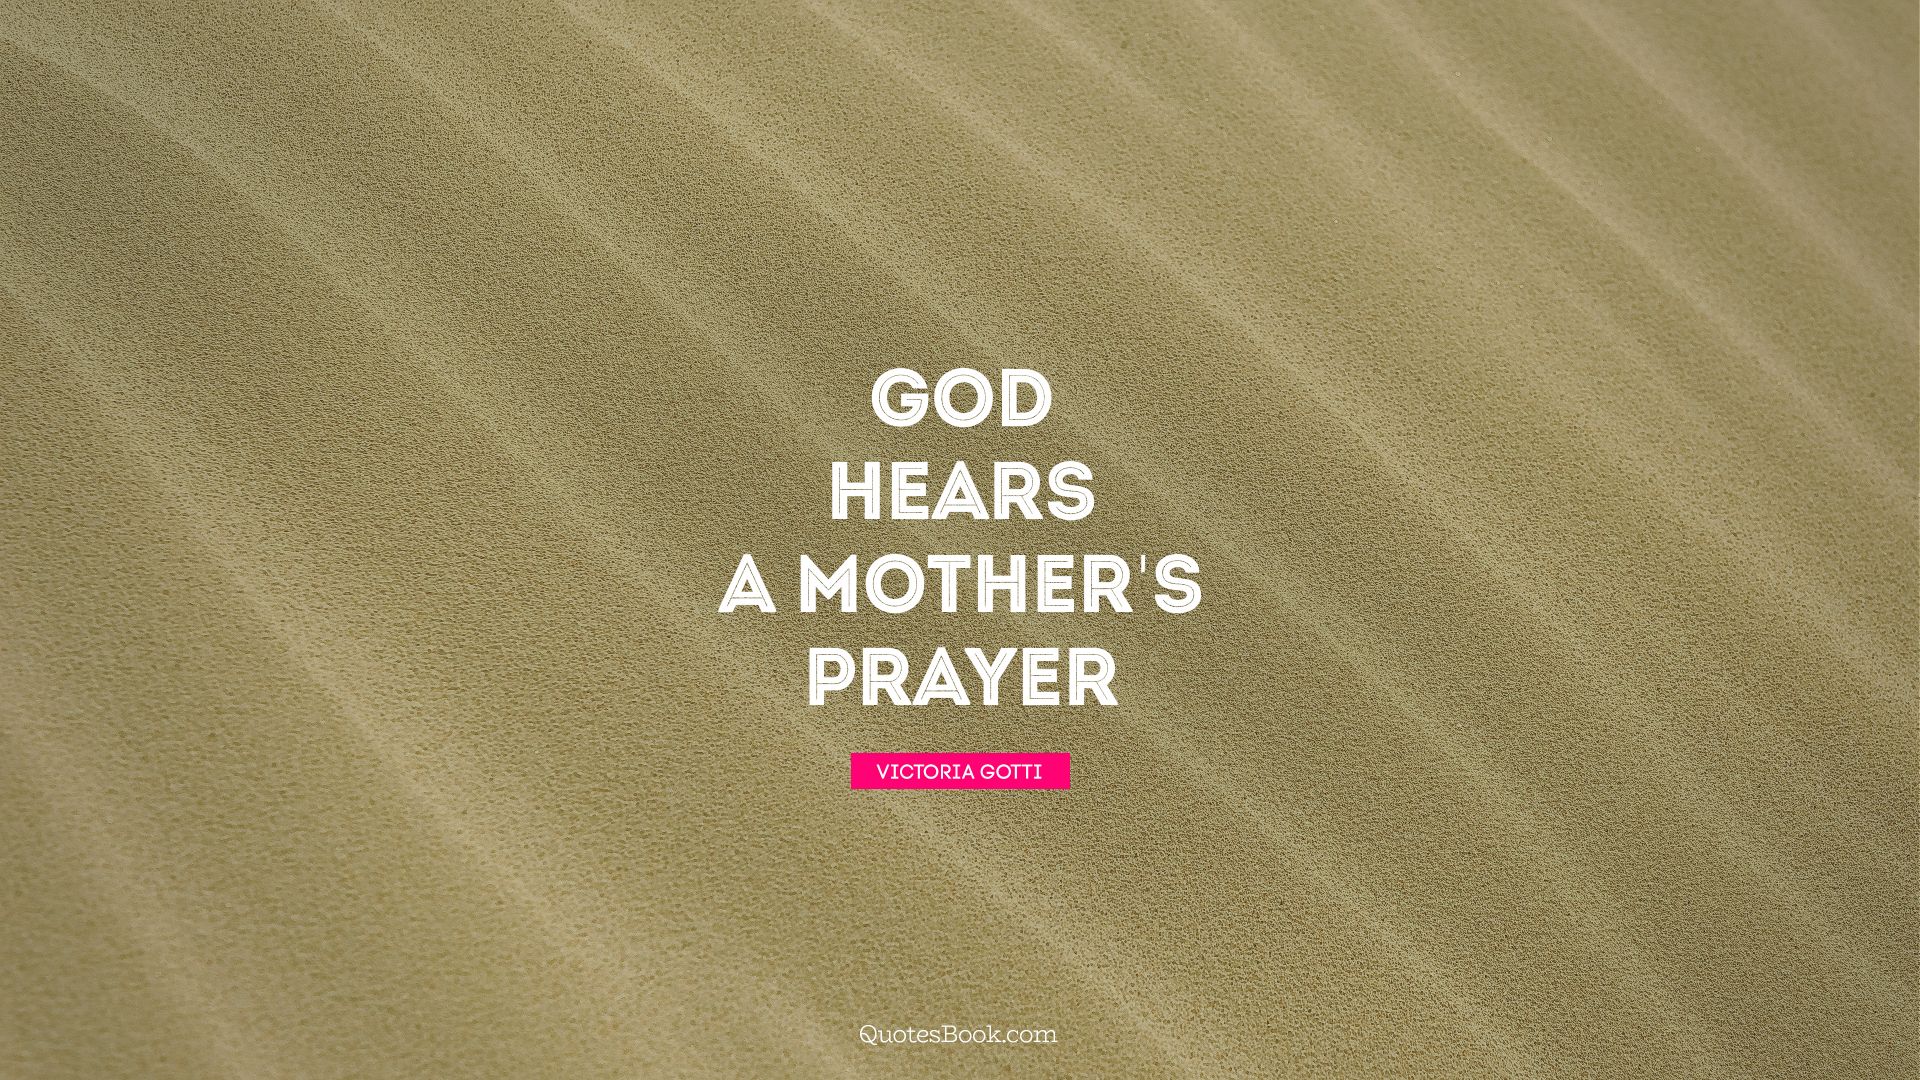 God hears a mother's prayer. - Quote by Victoria Gotti